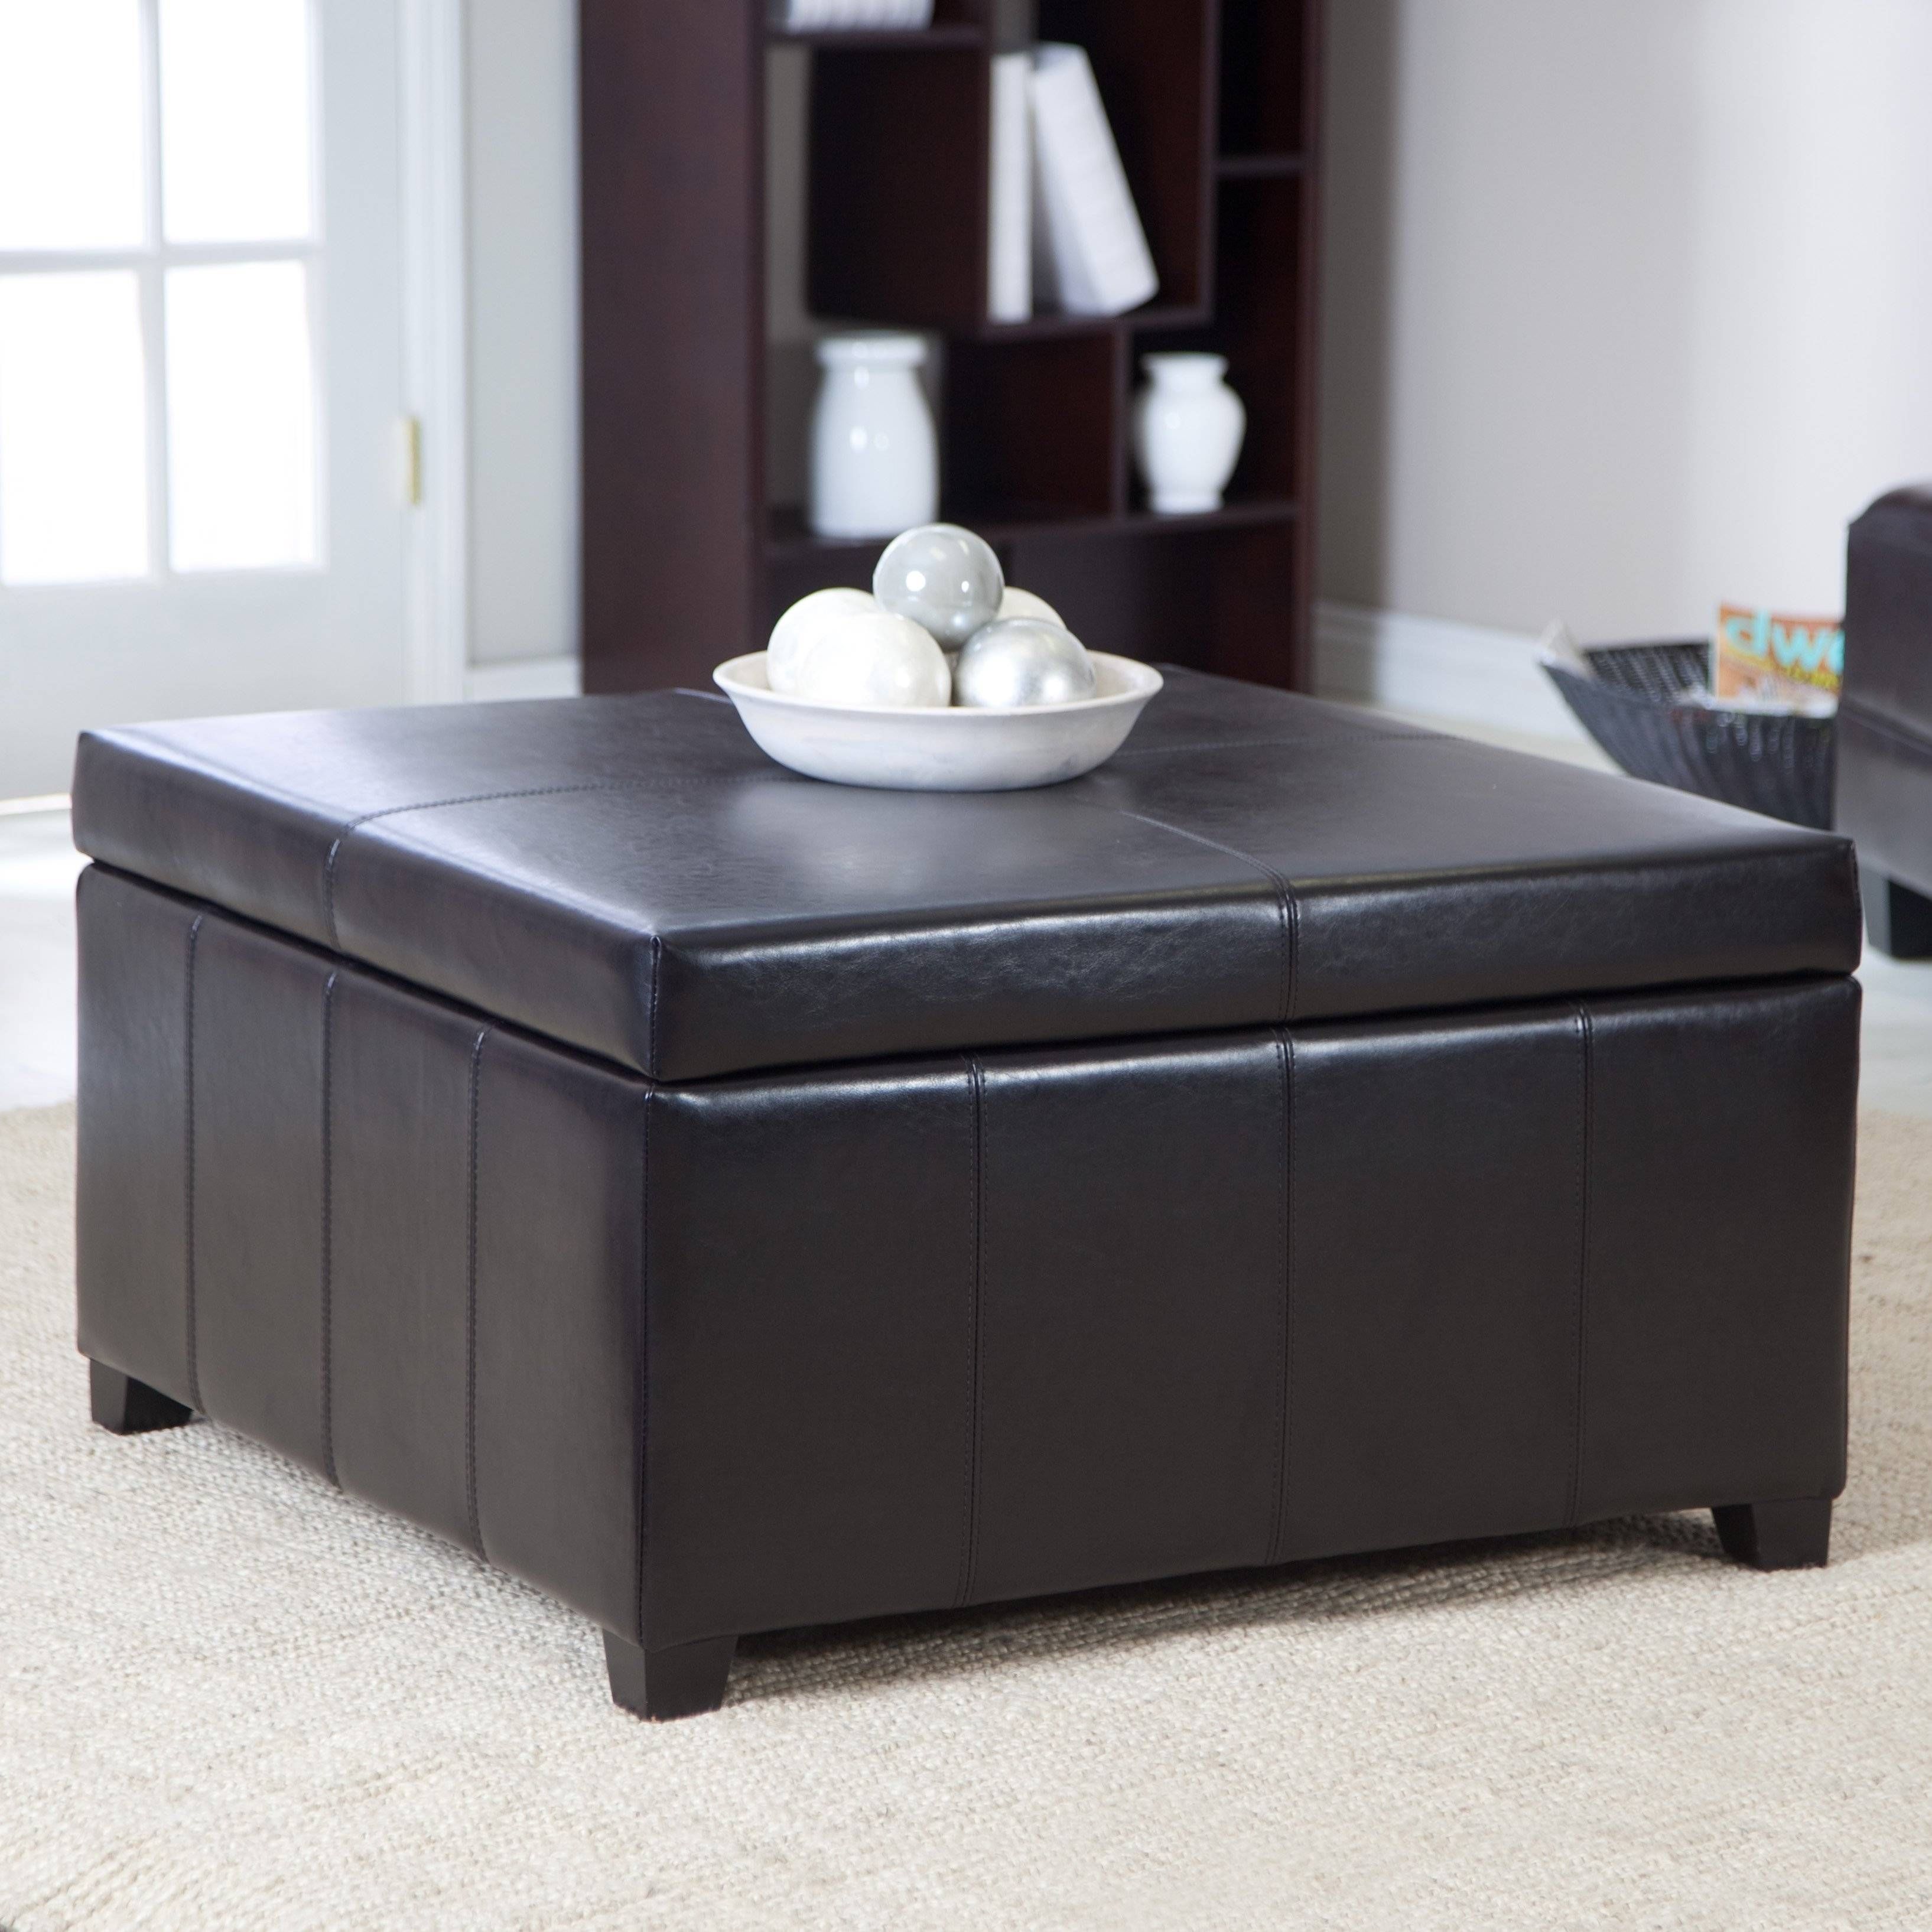 Coffee Table: Appealing Square Storage Ottoman Coffee Table Inside Square Storage Coffee Tables (View 9 of 30)